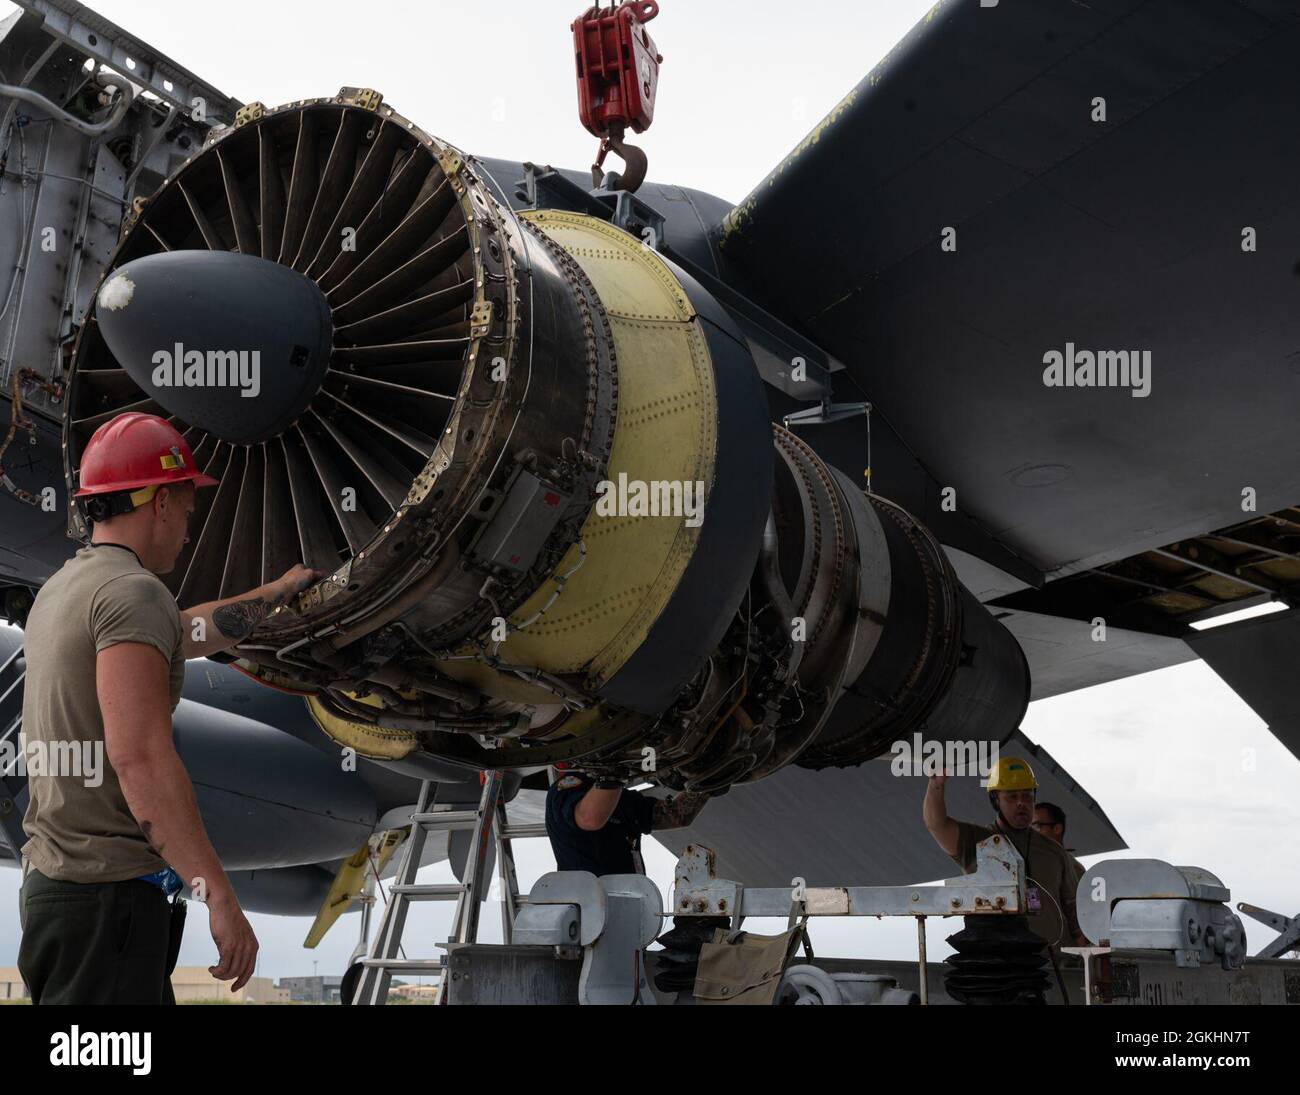 U.S. Air Force Airmen move an engine in order to repair it during a Bomber Task Force deployment at Andersen Air Force Base, Guam, April 25, 2021. U.S. Strategic Command units regularly conduct training with and in support of the Geographic Combatant Commands. USSTRATCOM Bomber Task Force missions help maintain global stability and security while enabling units to become familiar with operations in different regions. Stock Photo